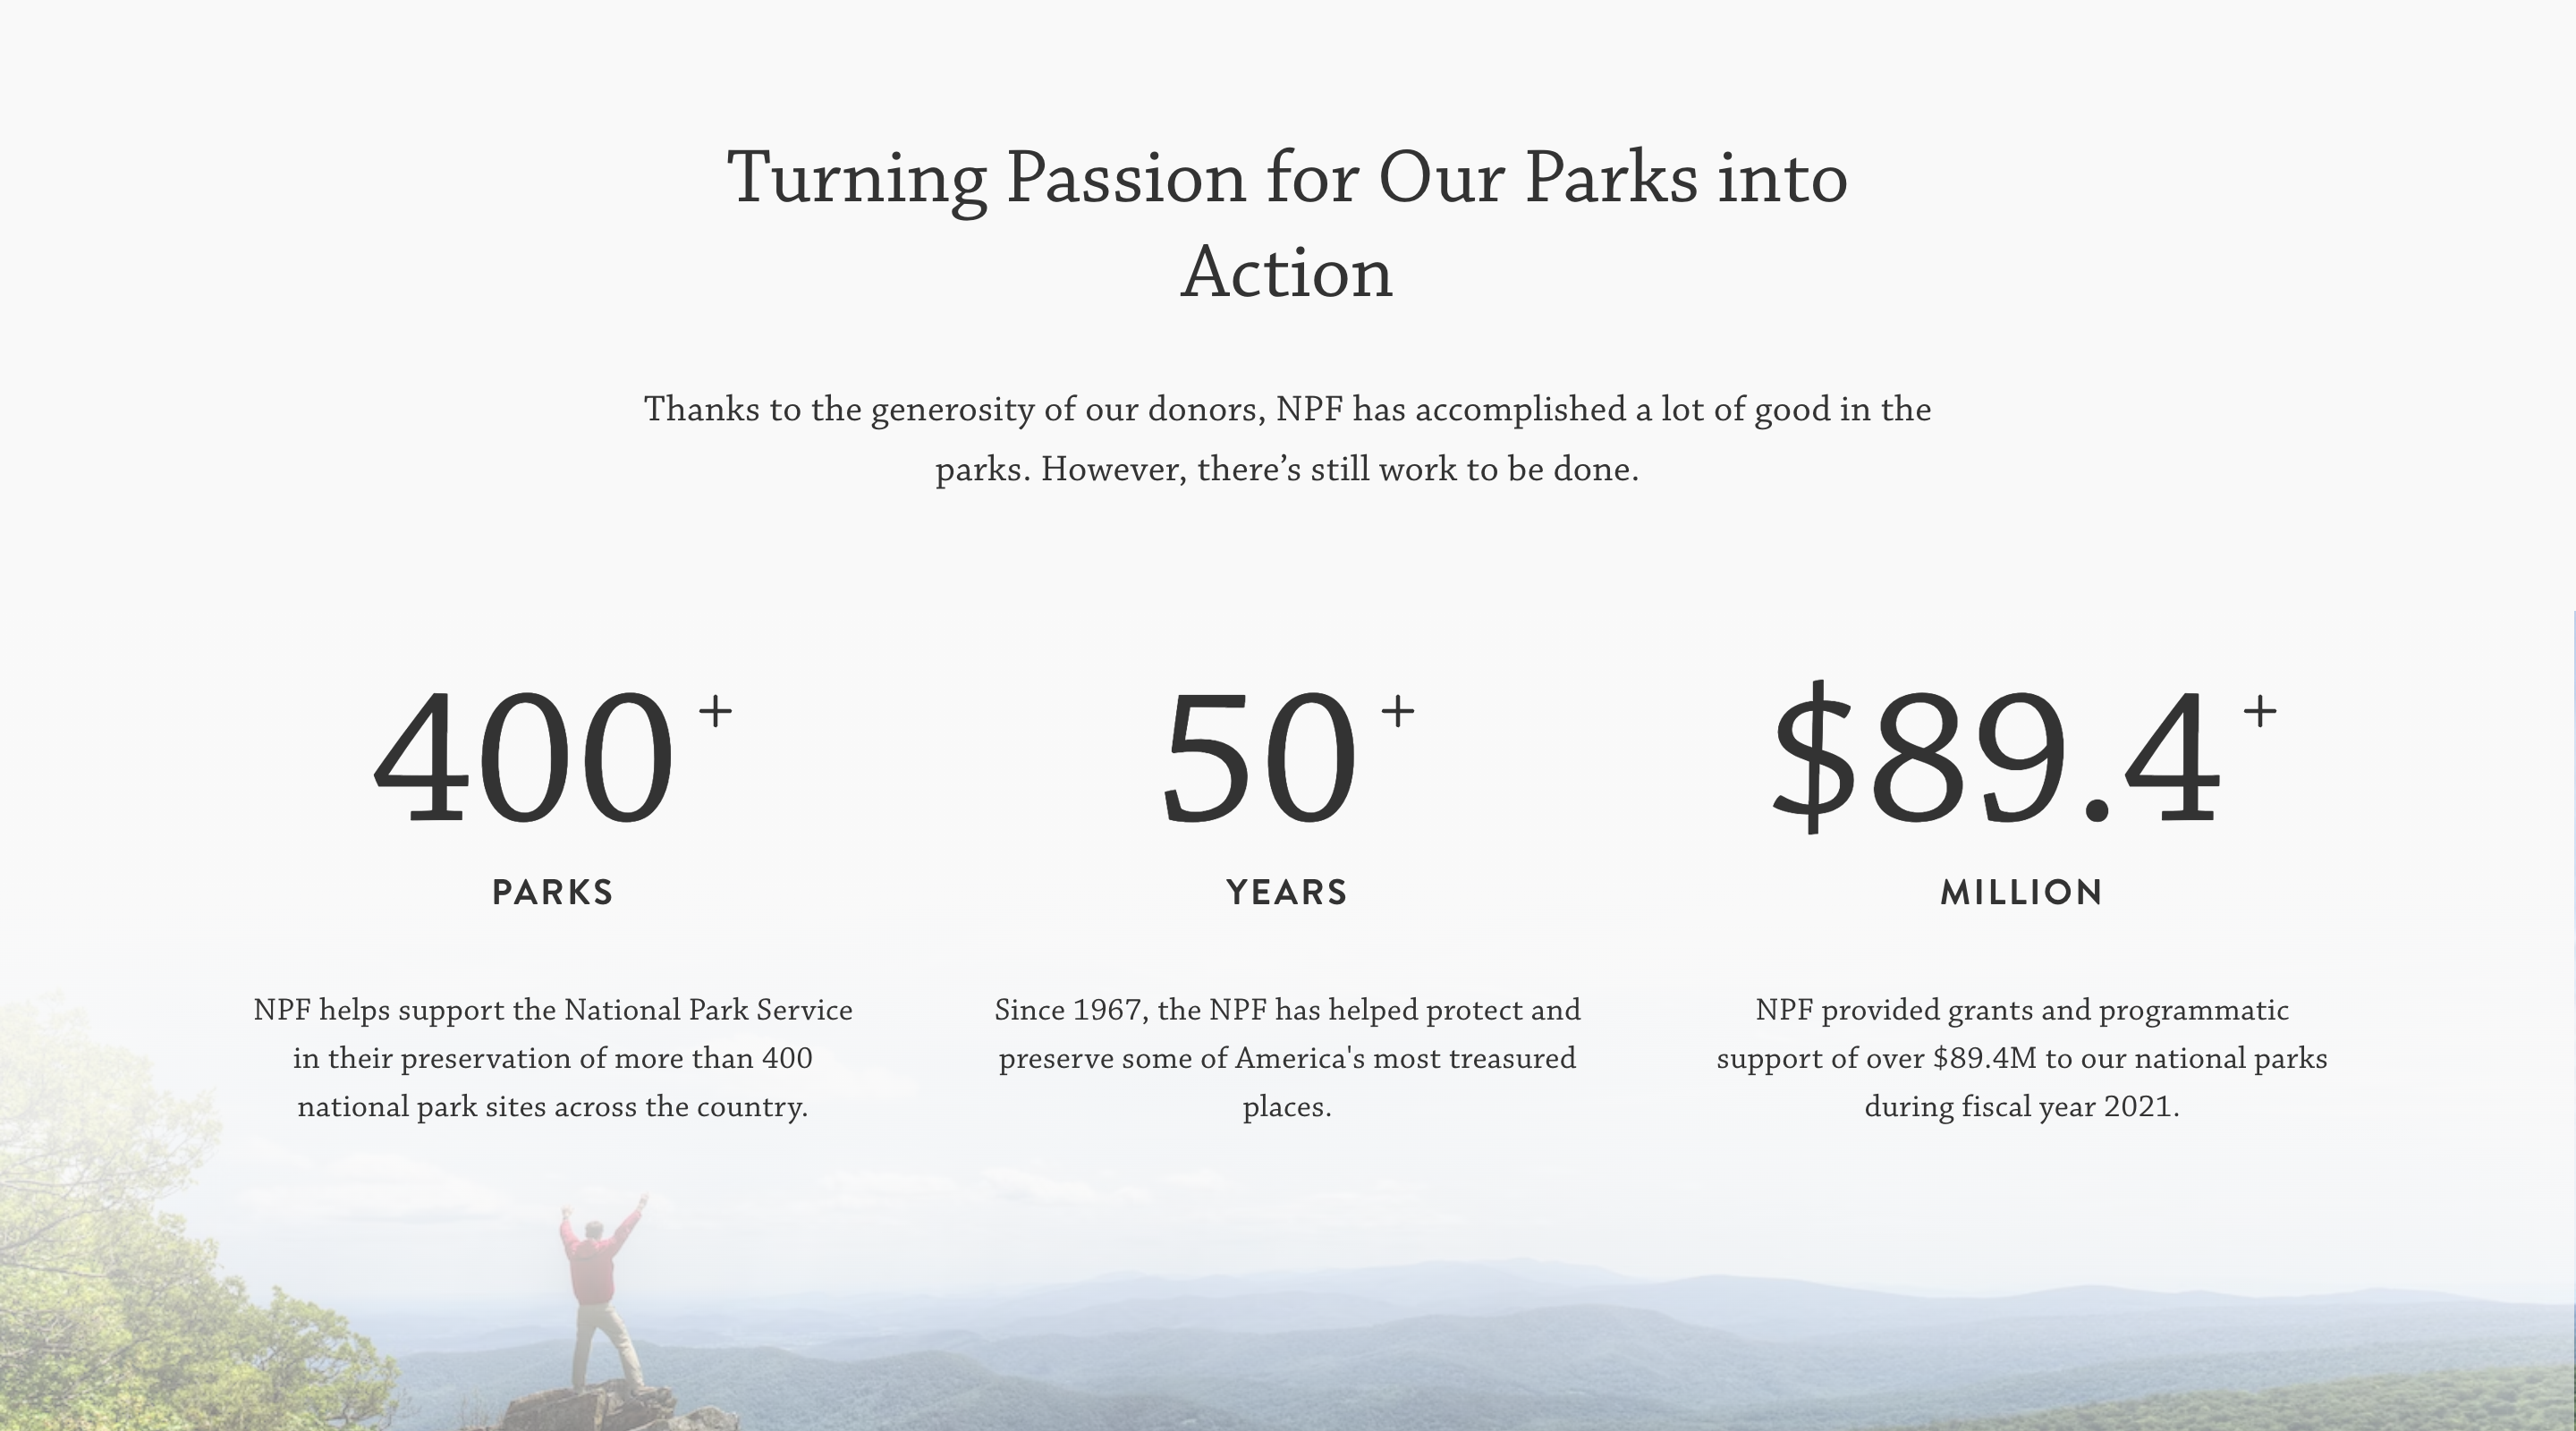 Screenshot of the National Park Foundation website. The visible section contains statistics about the Foundation in three columns. The statistics are displayed as large numbers with smaller description text underneath.